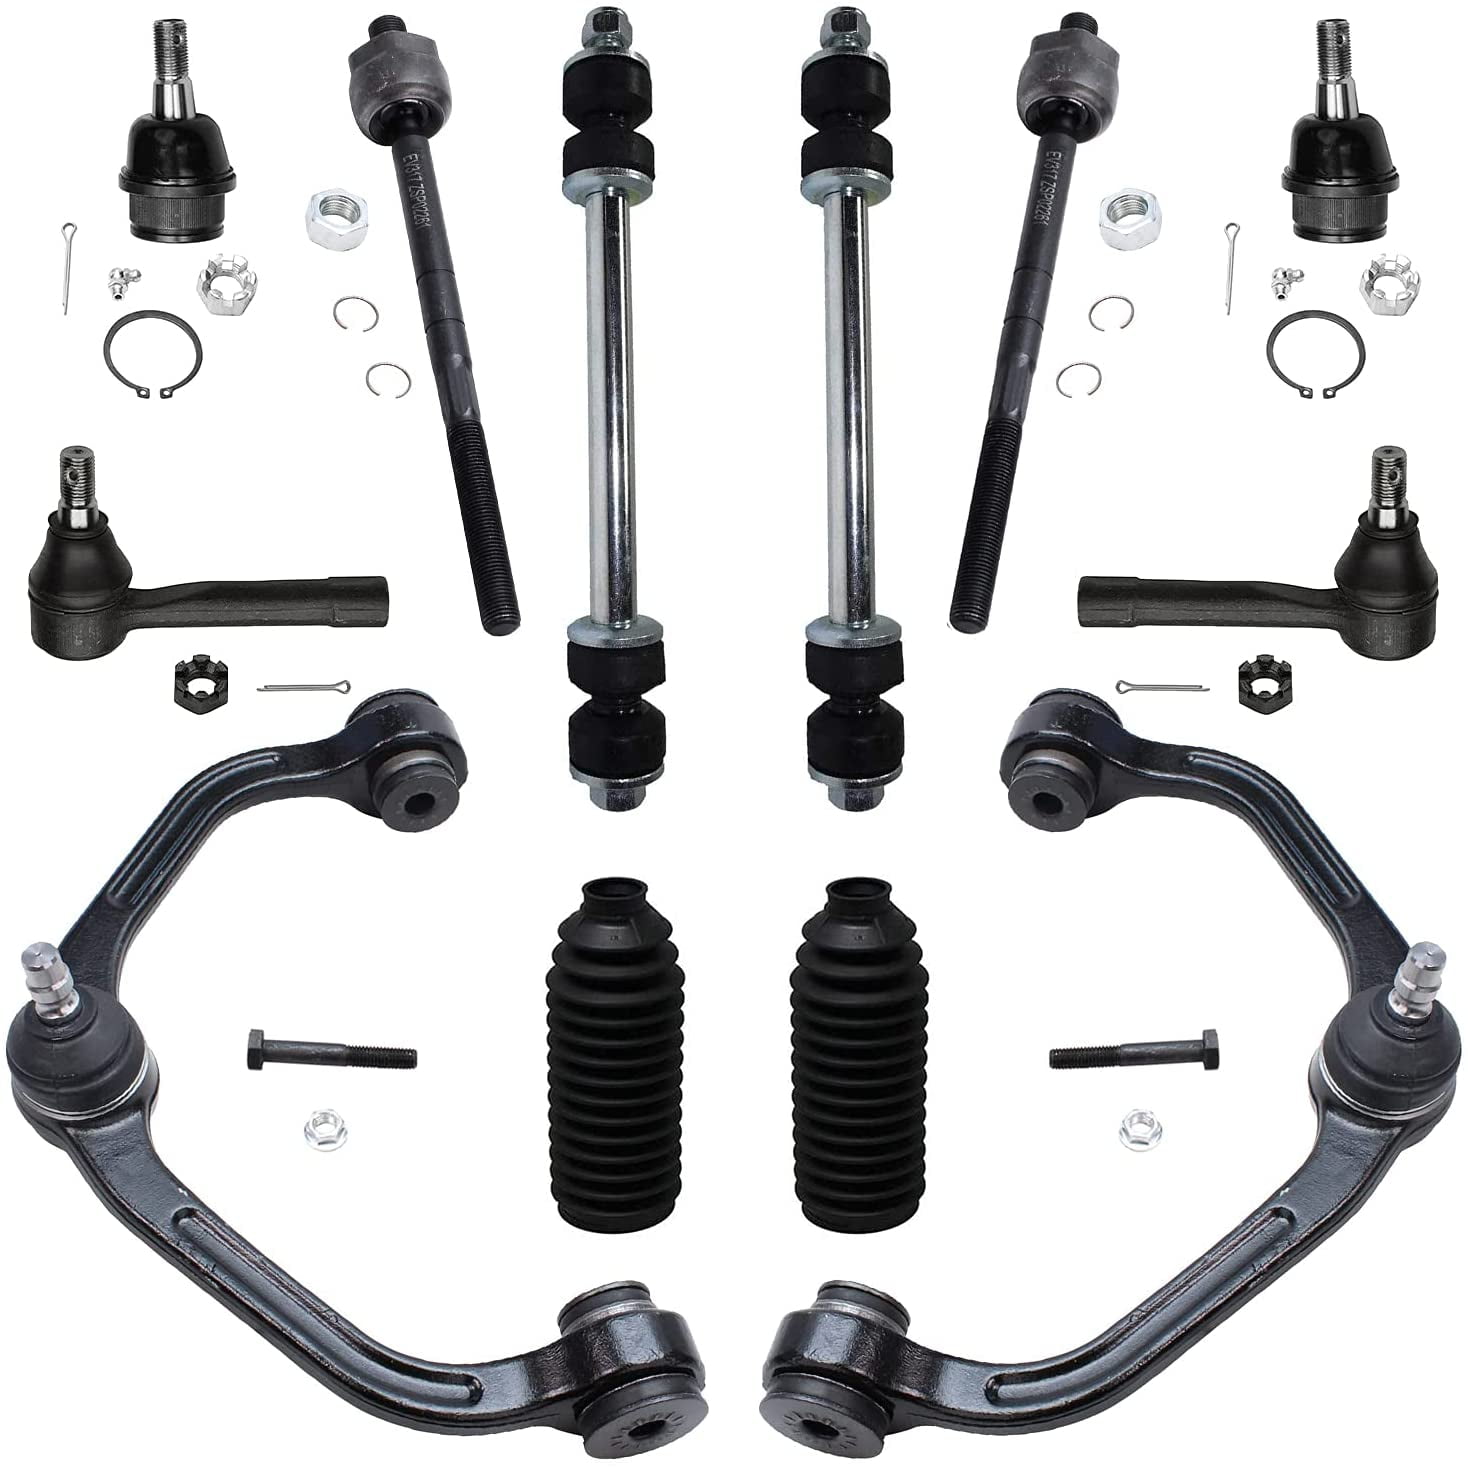 Detroit Axle Front Upper Control Arm w/Ball Joint Assembly Replacement  for Ford Ranger Mazda B2300 B2500 B3000 B4000-2pc Set コントロ 